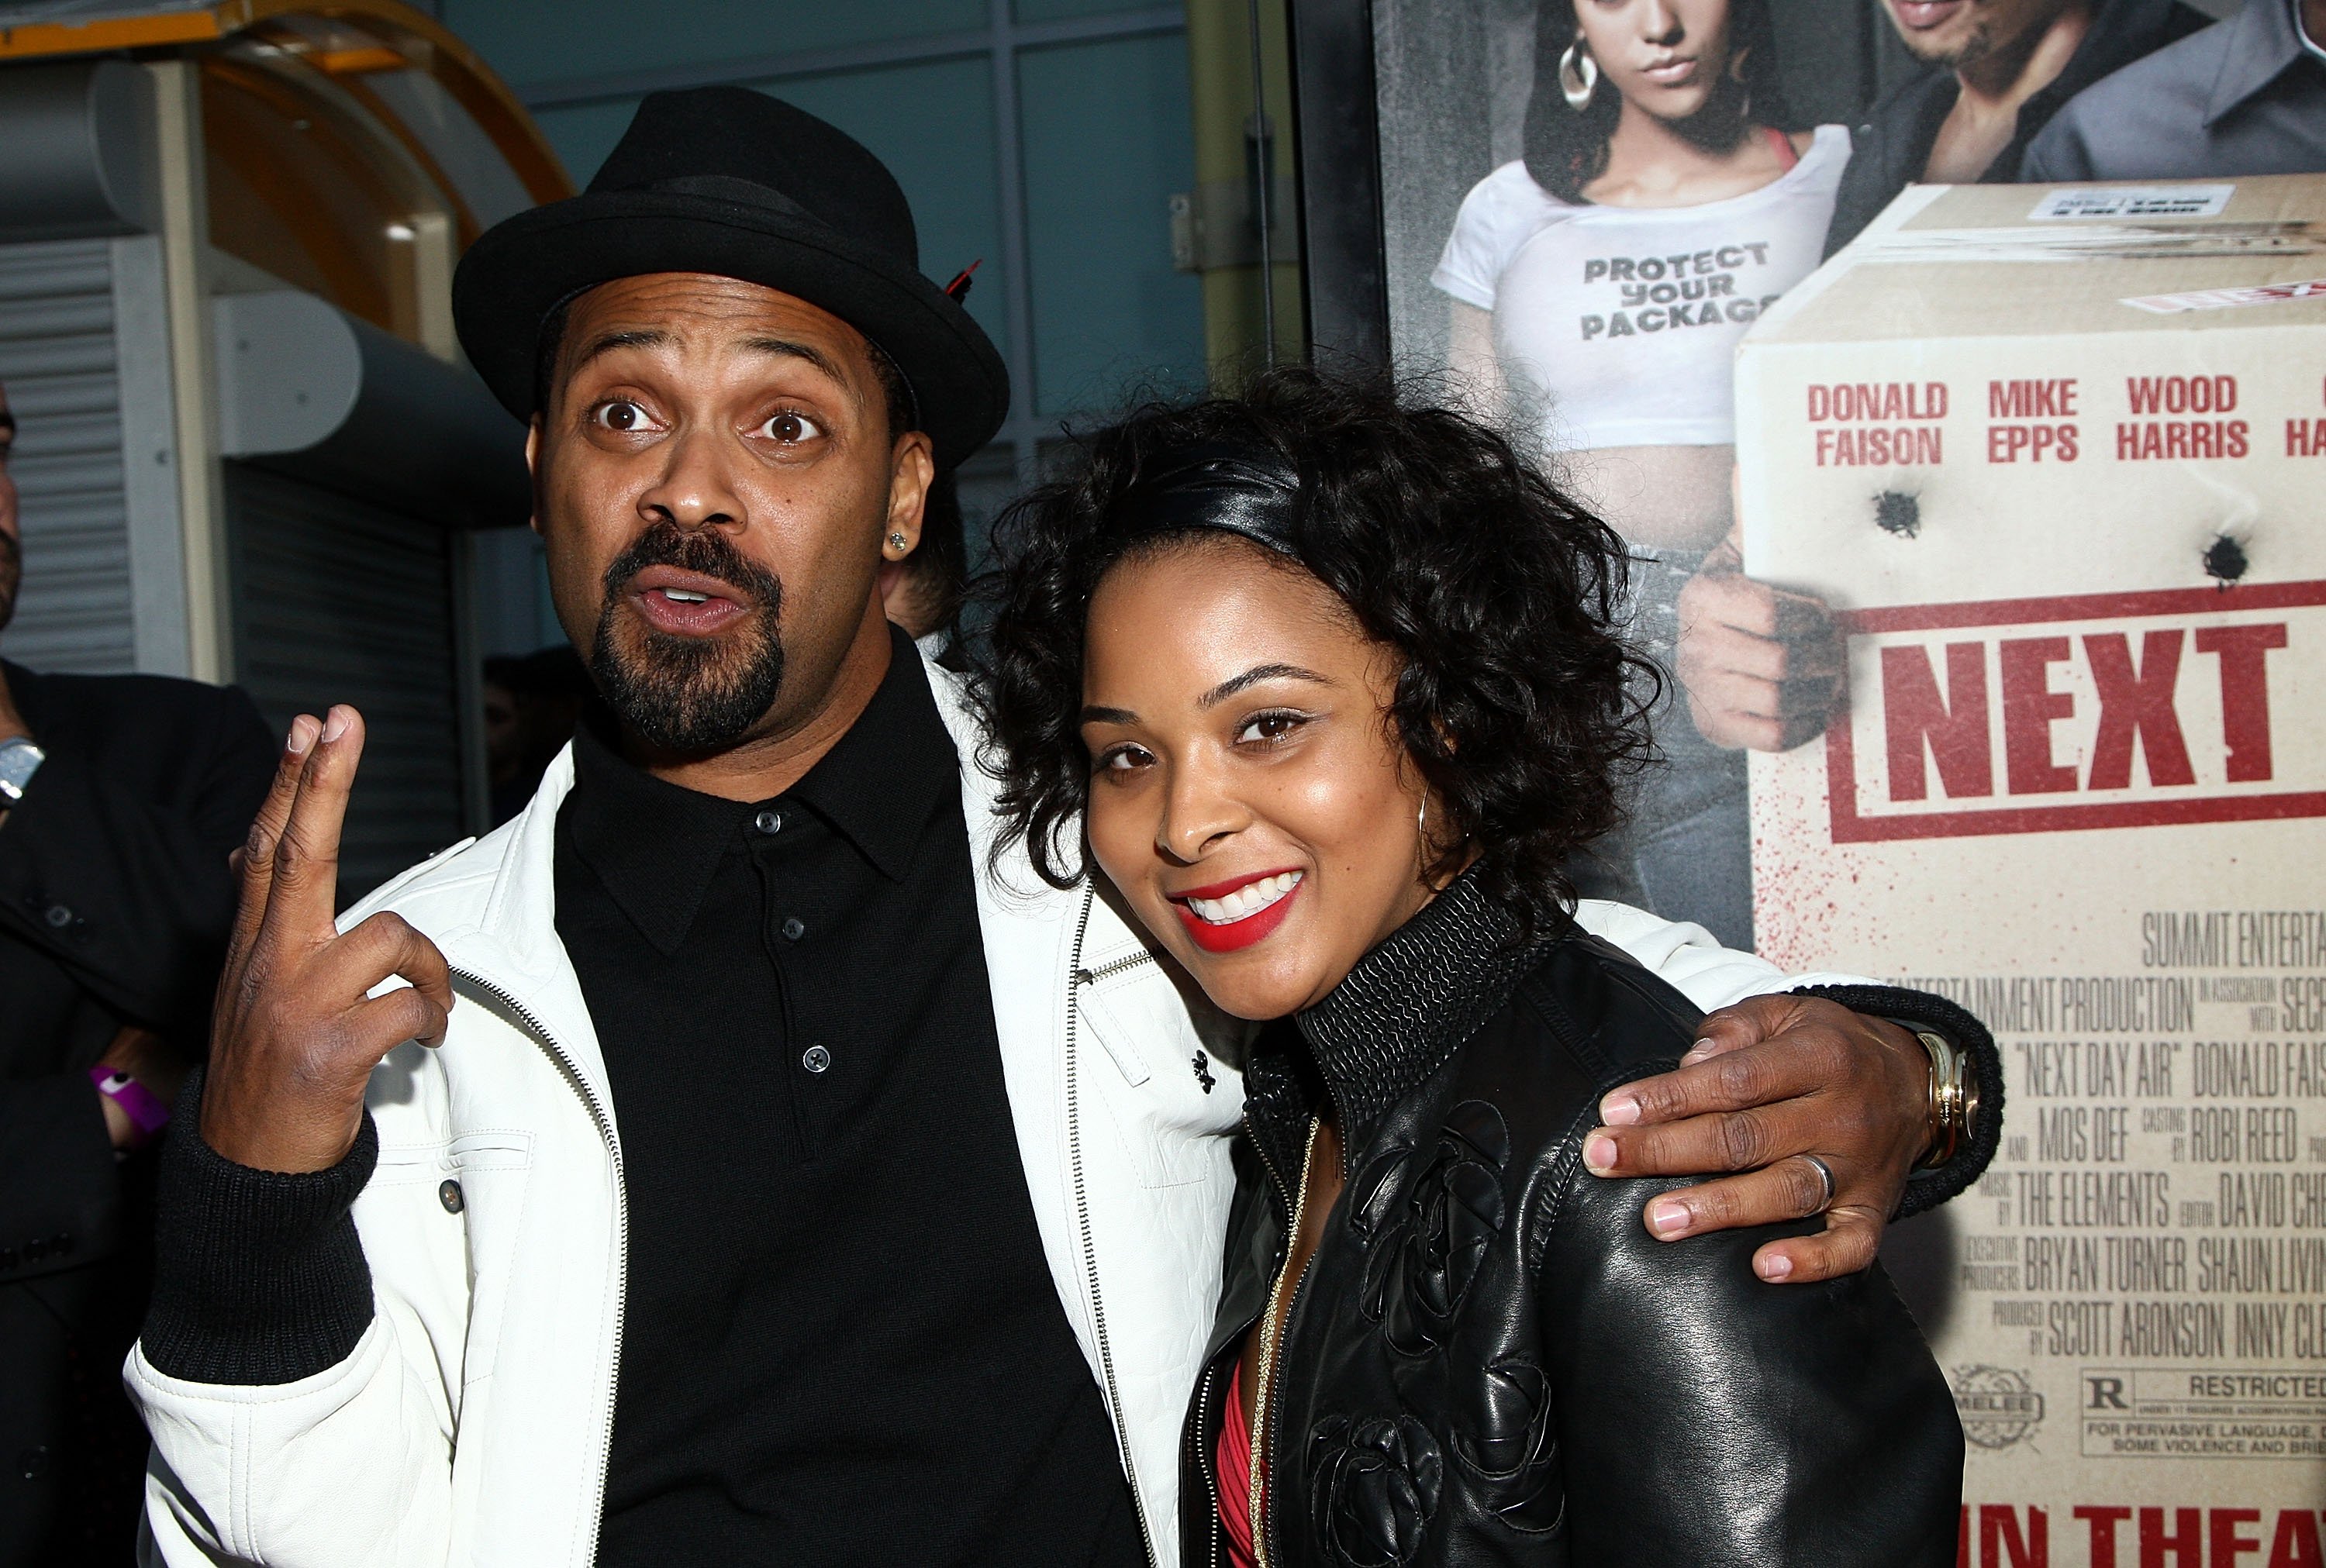 Mike Epps and wife Mechelle Epps arrive at the screening of Summit Entertainment's "Next Day Air" held at the Arclight Theaters on April 29, 2009 | Photo: GettyImages